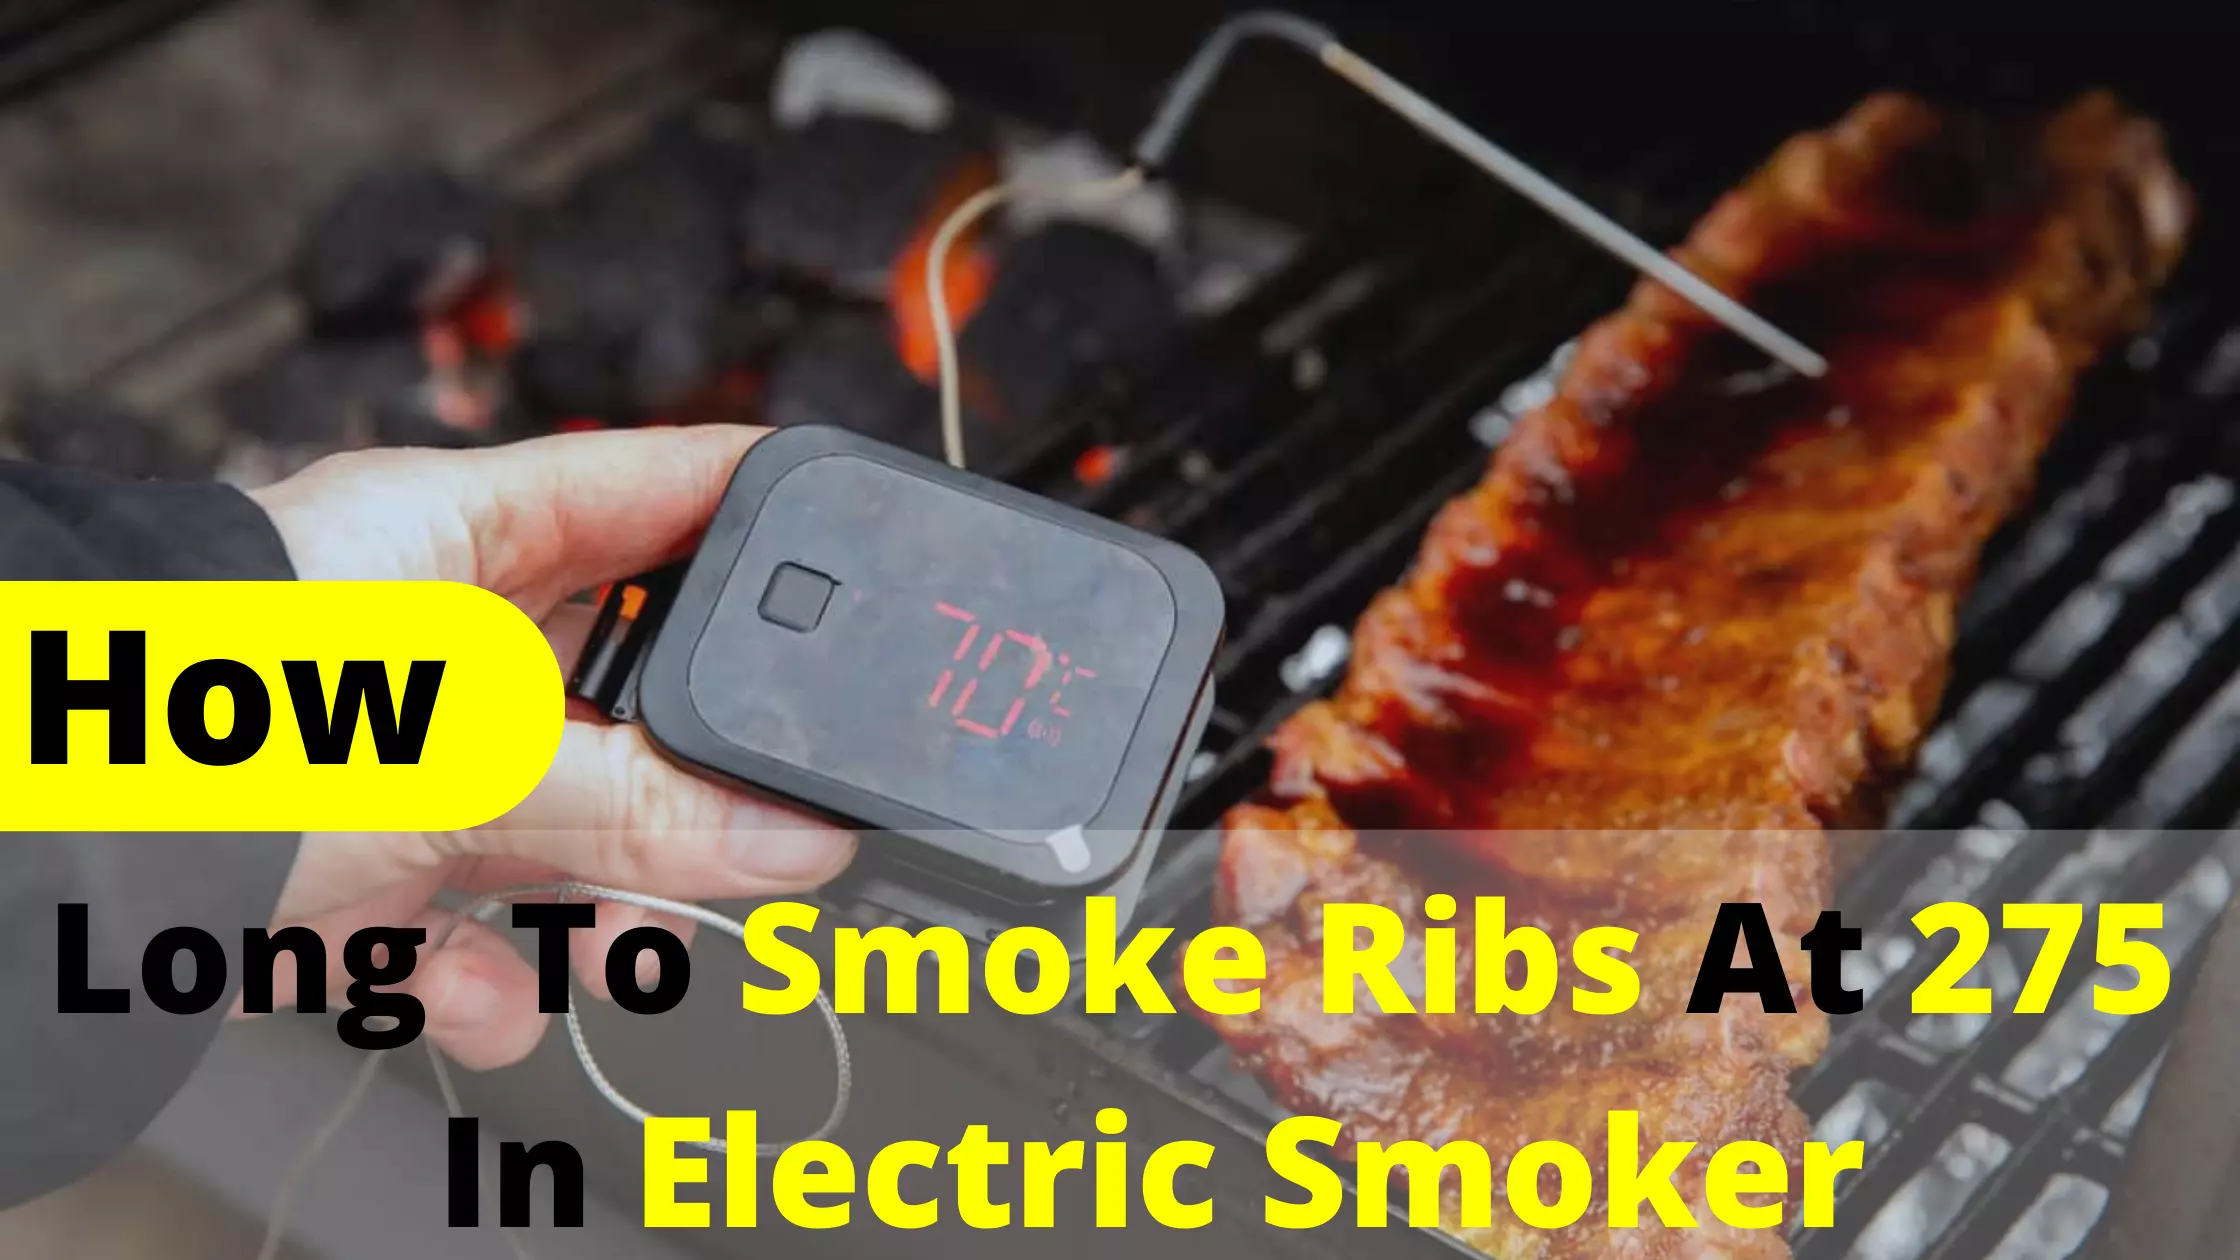 how long to smoke ribs at 275 in electric smoker